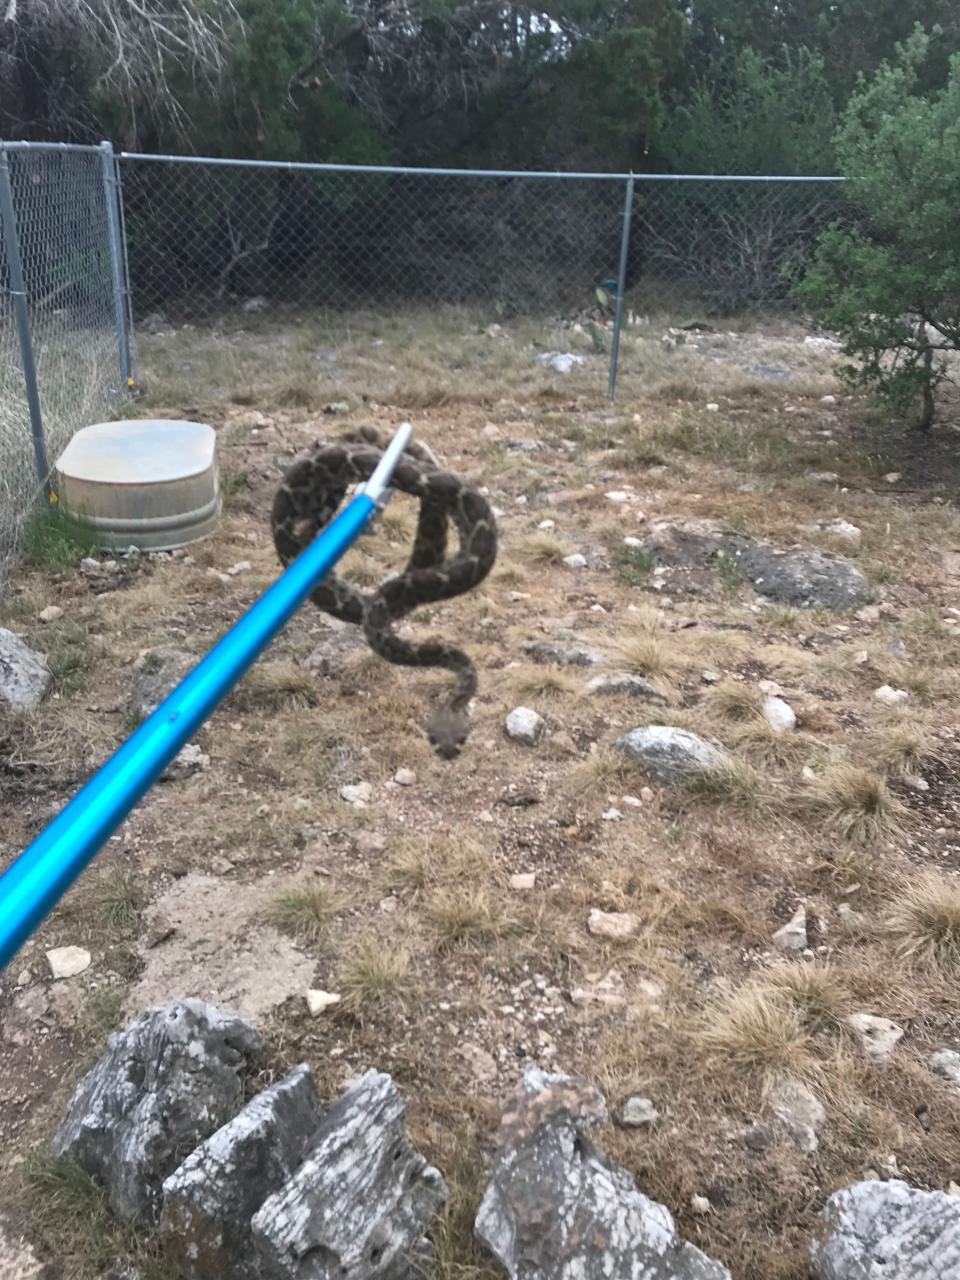 This rattlesnake gave the writer's dog, Pepper, a scare recently. Beware of camouflaged snakes in your yard as temperatures get warmer.